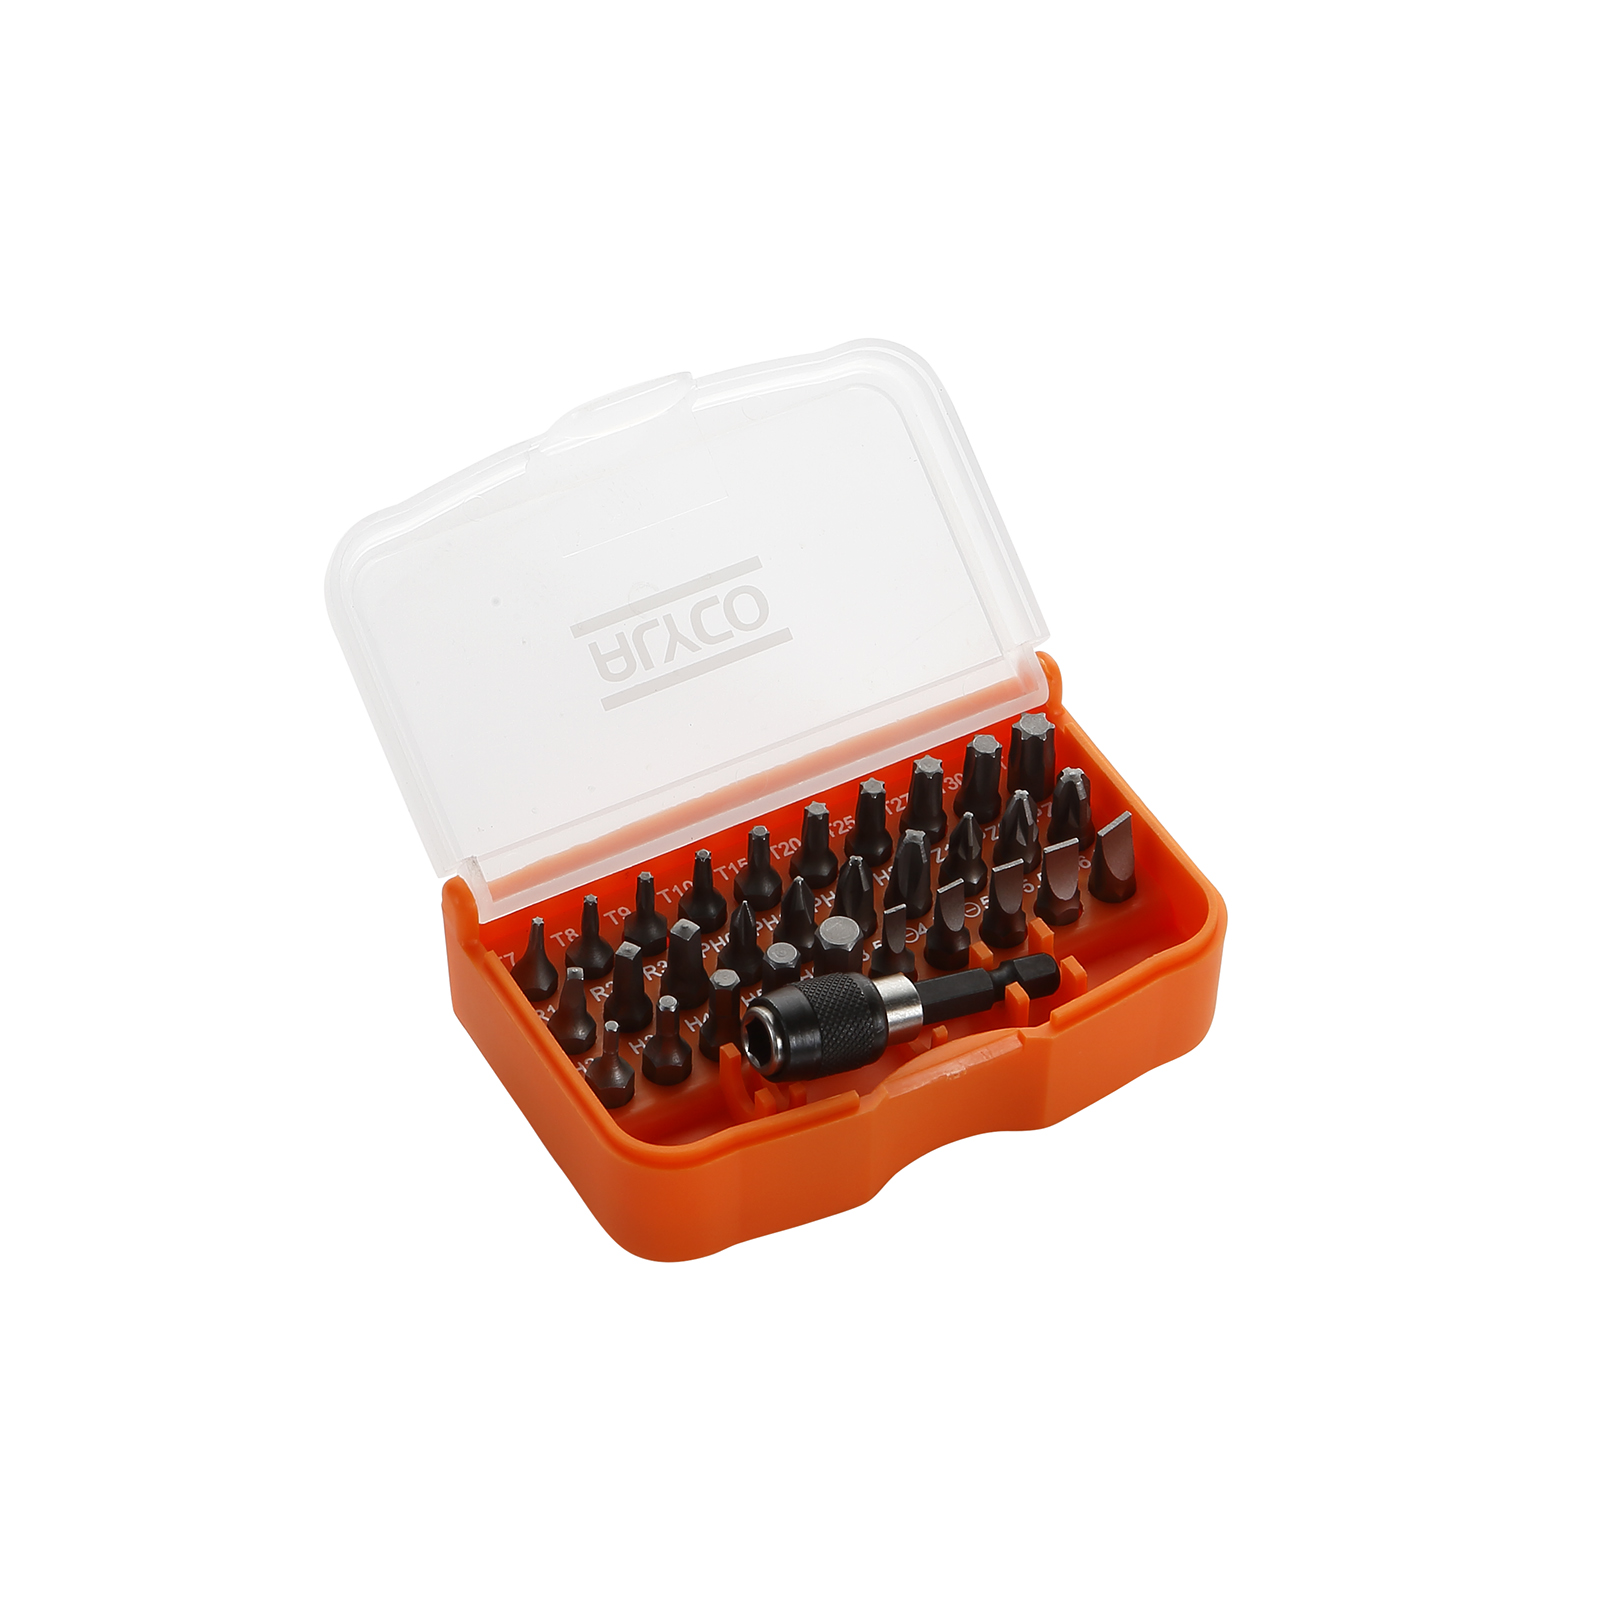 Set of 30 1/4 Screwdriver Bits and adaptor in Plastic Case ALYCO